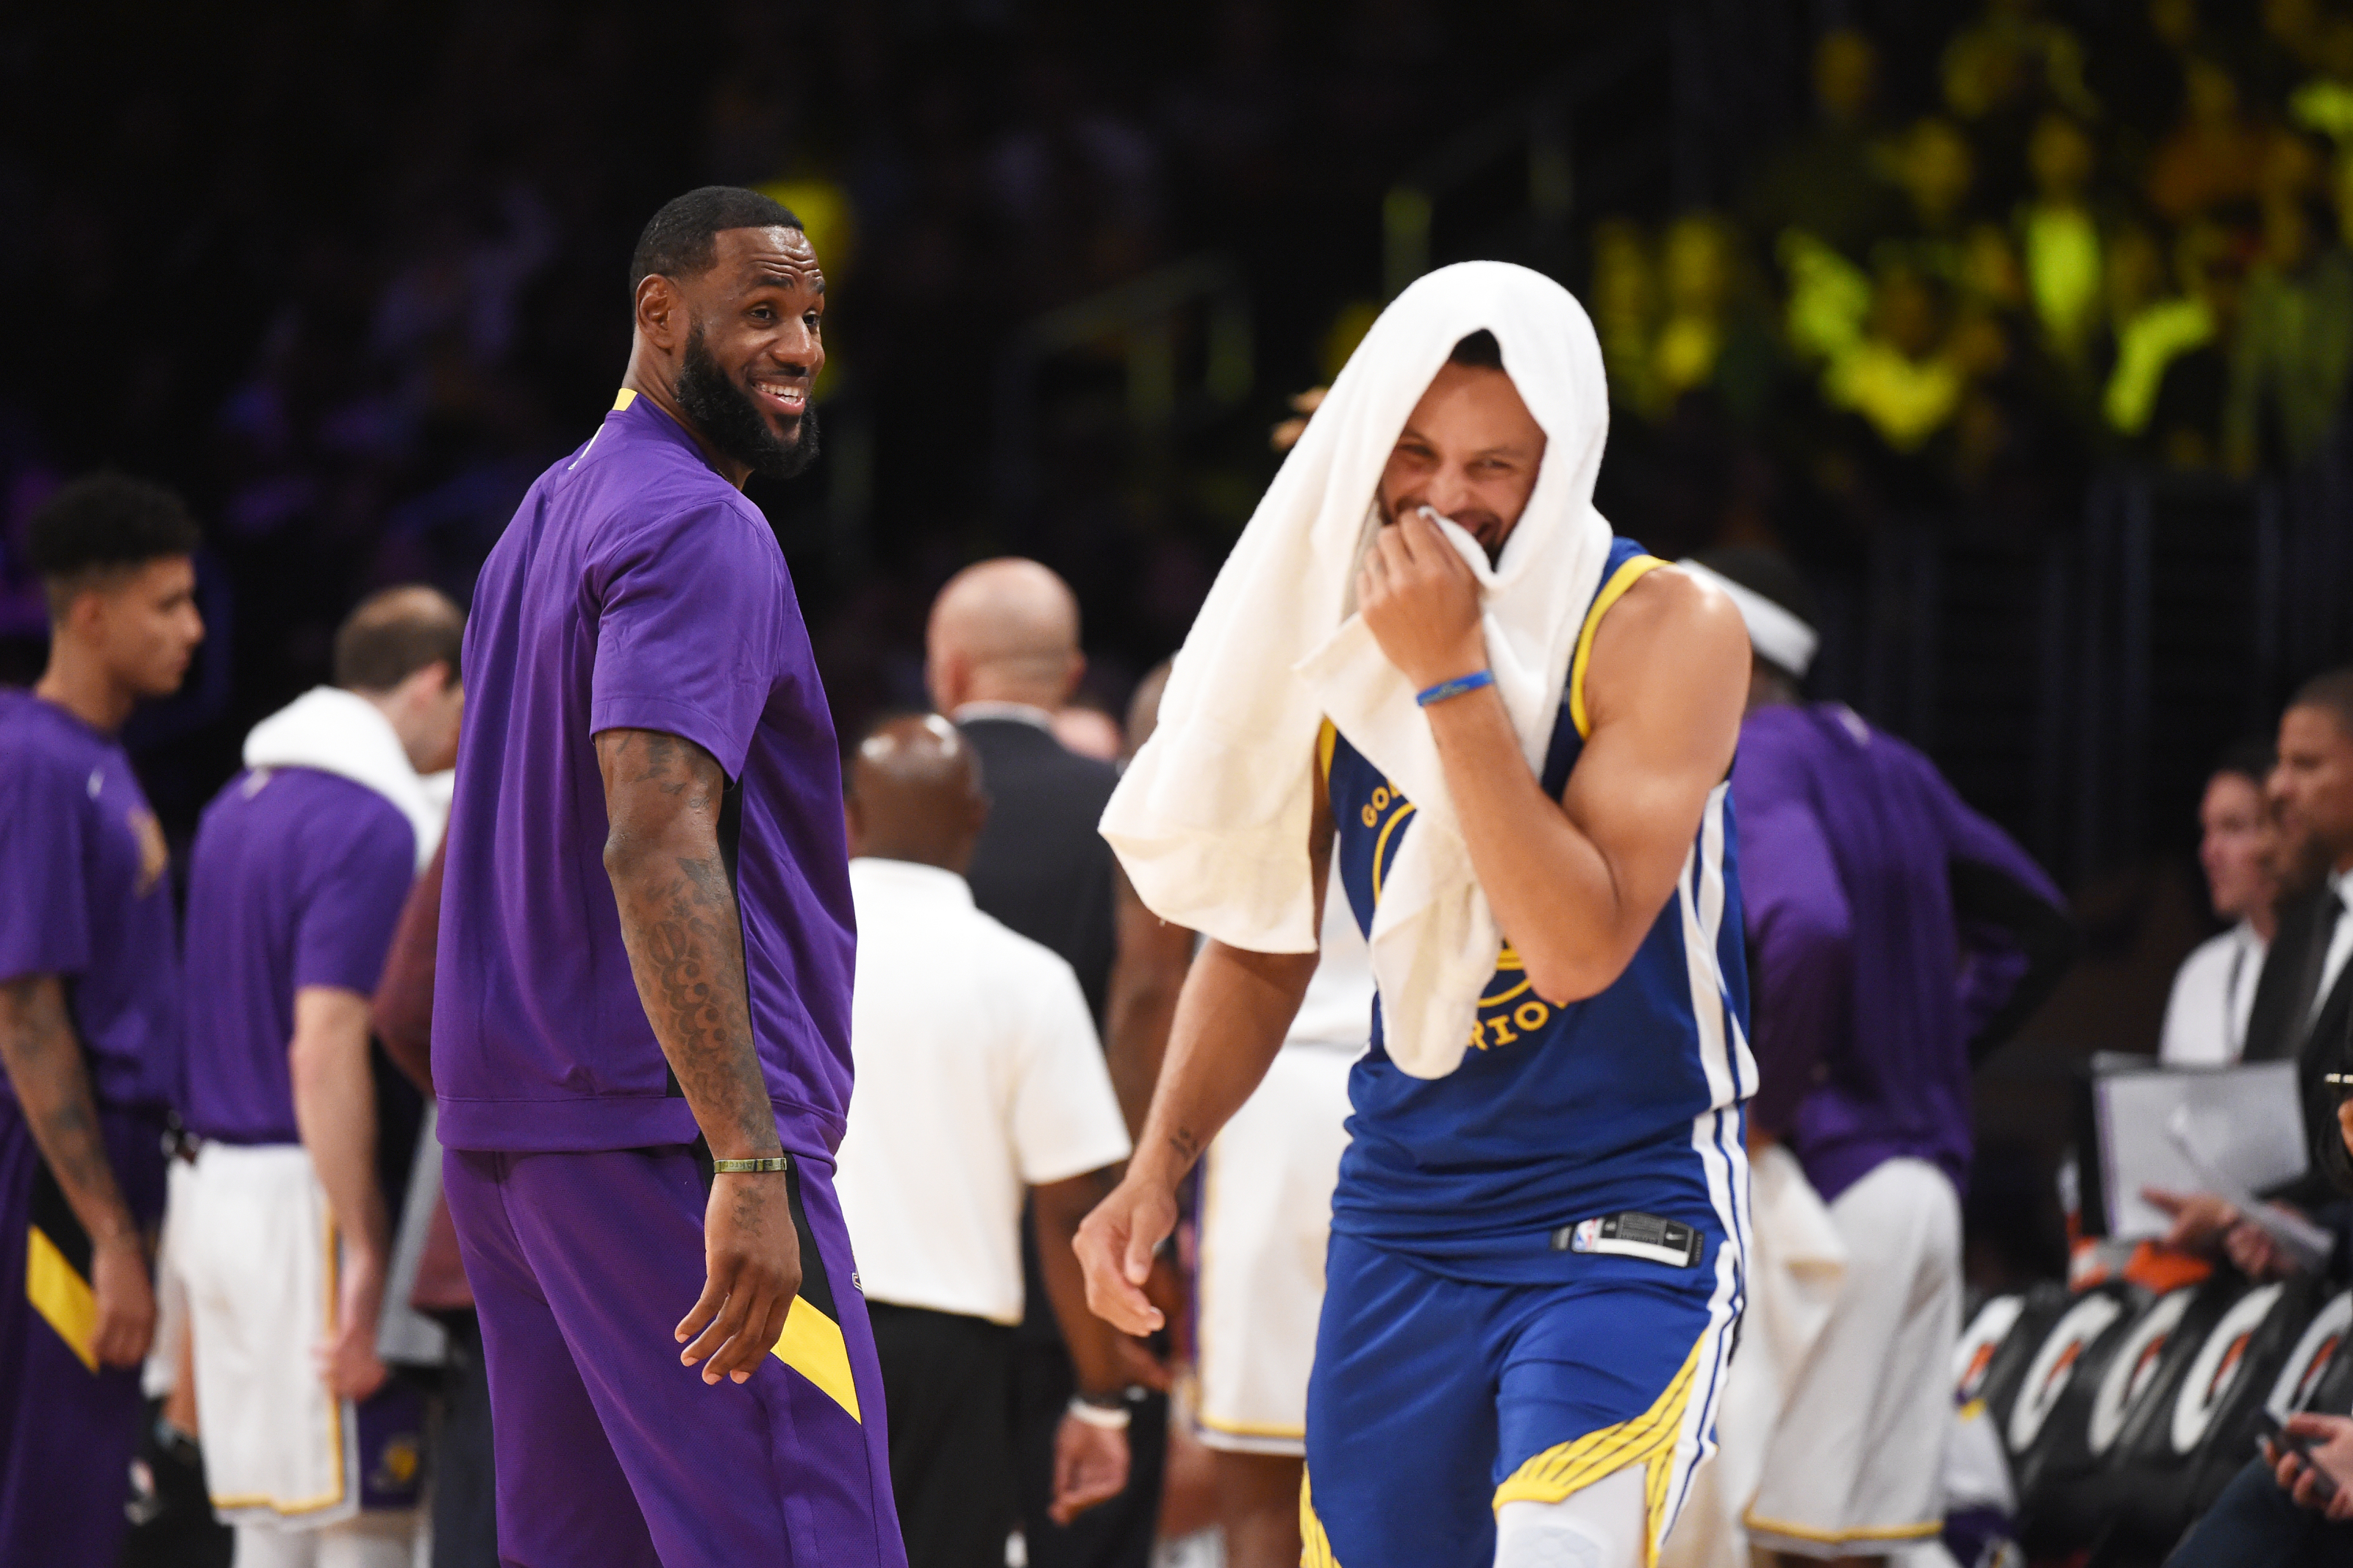 LOS ANGELES, CA - OCTOBER 14: LeBron James #23 of the Los Angeles Lakers smiles during a pre-season game against the Golden State Warriors on October 14, 2019 at STAPLES Center in Los Angeles, California. NOTE TO USER: User expressly acknowledges and agrees that, by downloading and/or using this Photograph, user is consenting to the terms and conditions of the Getty Images License Agreement. Mandatory Copyright Notice: Copyright 2019 NBAE (Photo by Adam Pantozzi/NBAE via Getty Images)